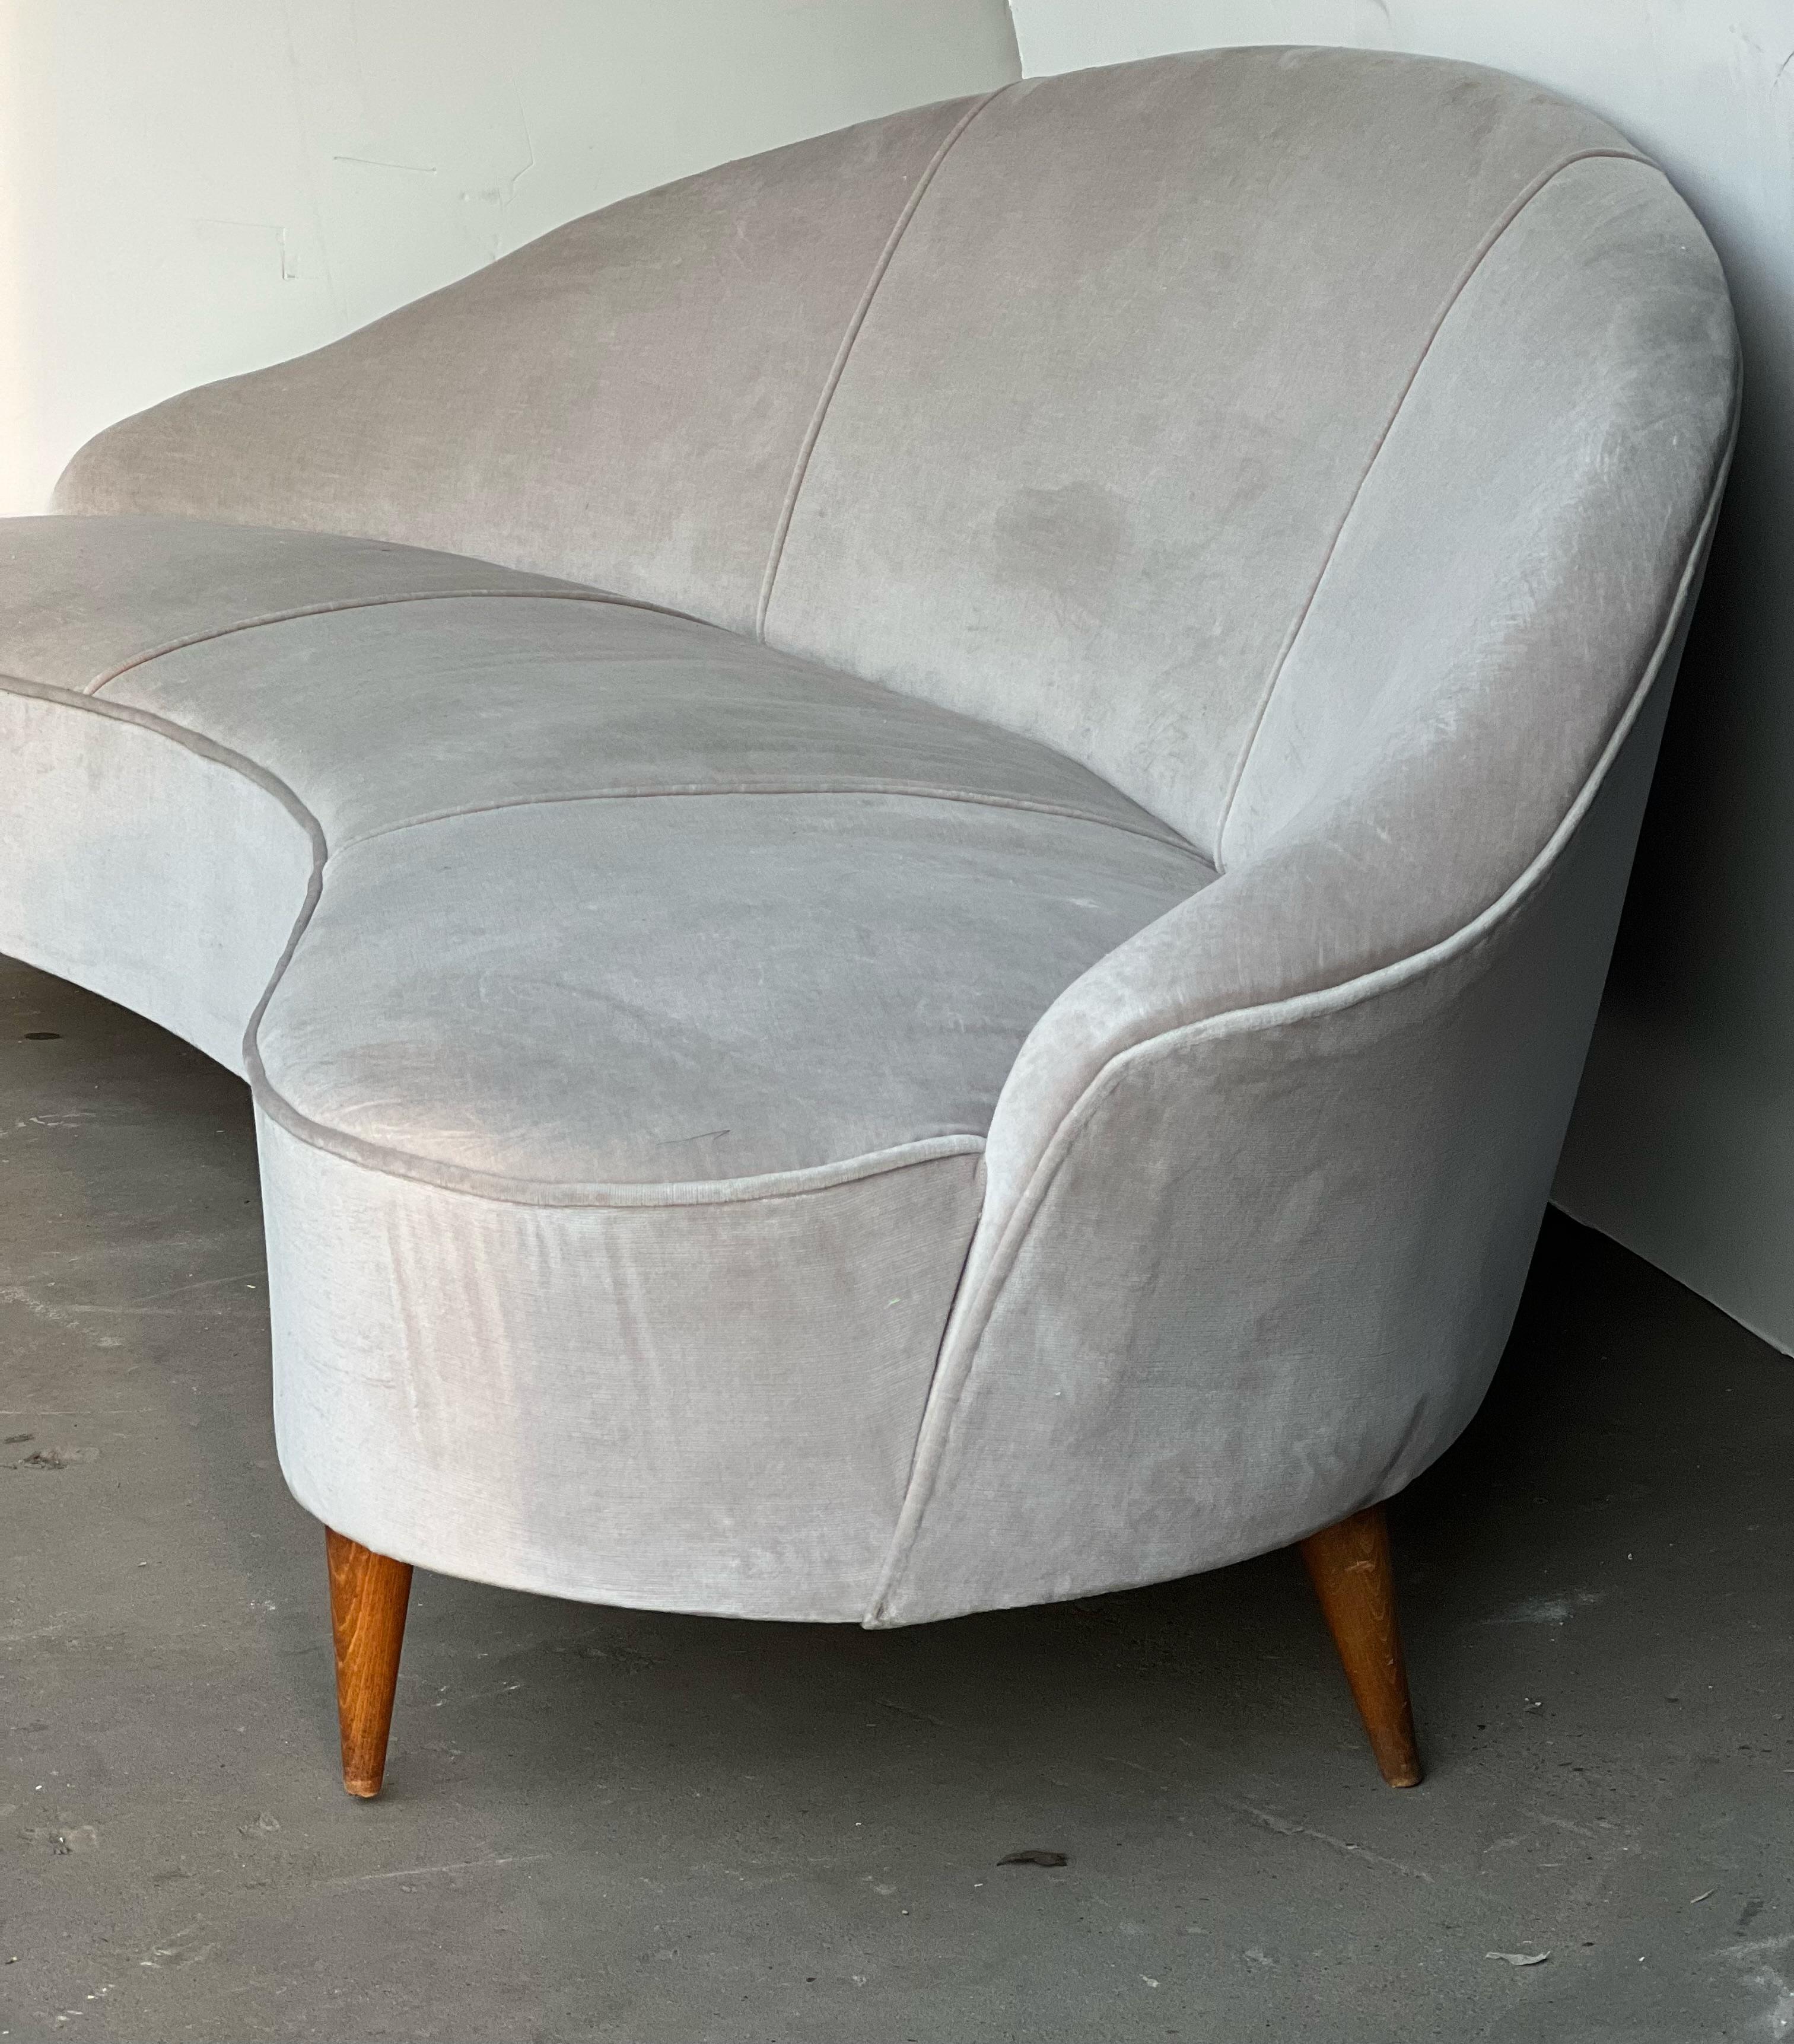 Beautiful Italian curved sofa with performance grade velvet that sits upon wooden legs in the style of Munari. This is a fabulous piece that can be reupholstered and used in any setting from traditional to modern. The upholstery shows imperfections